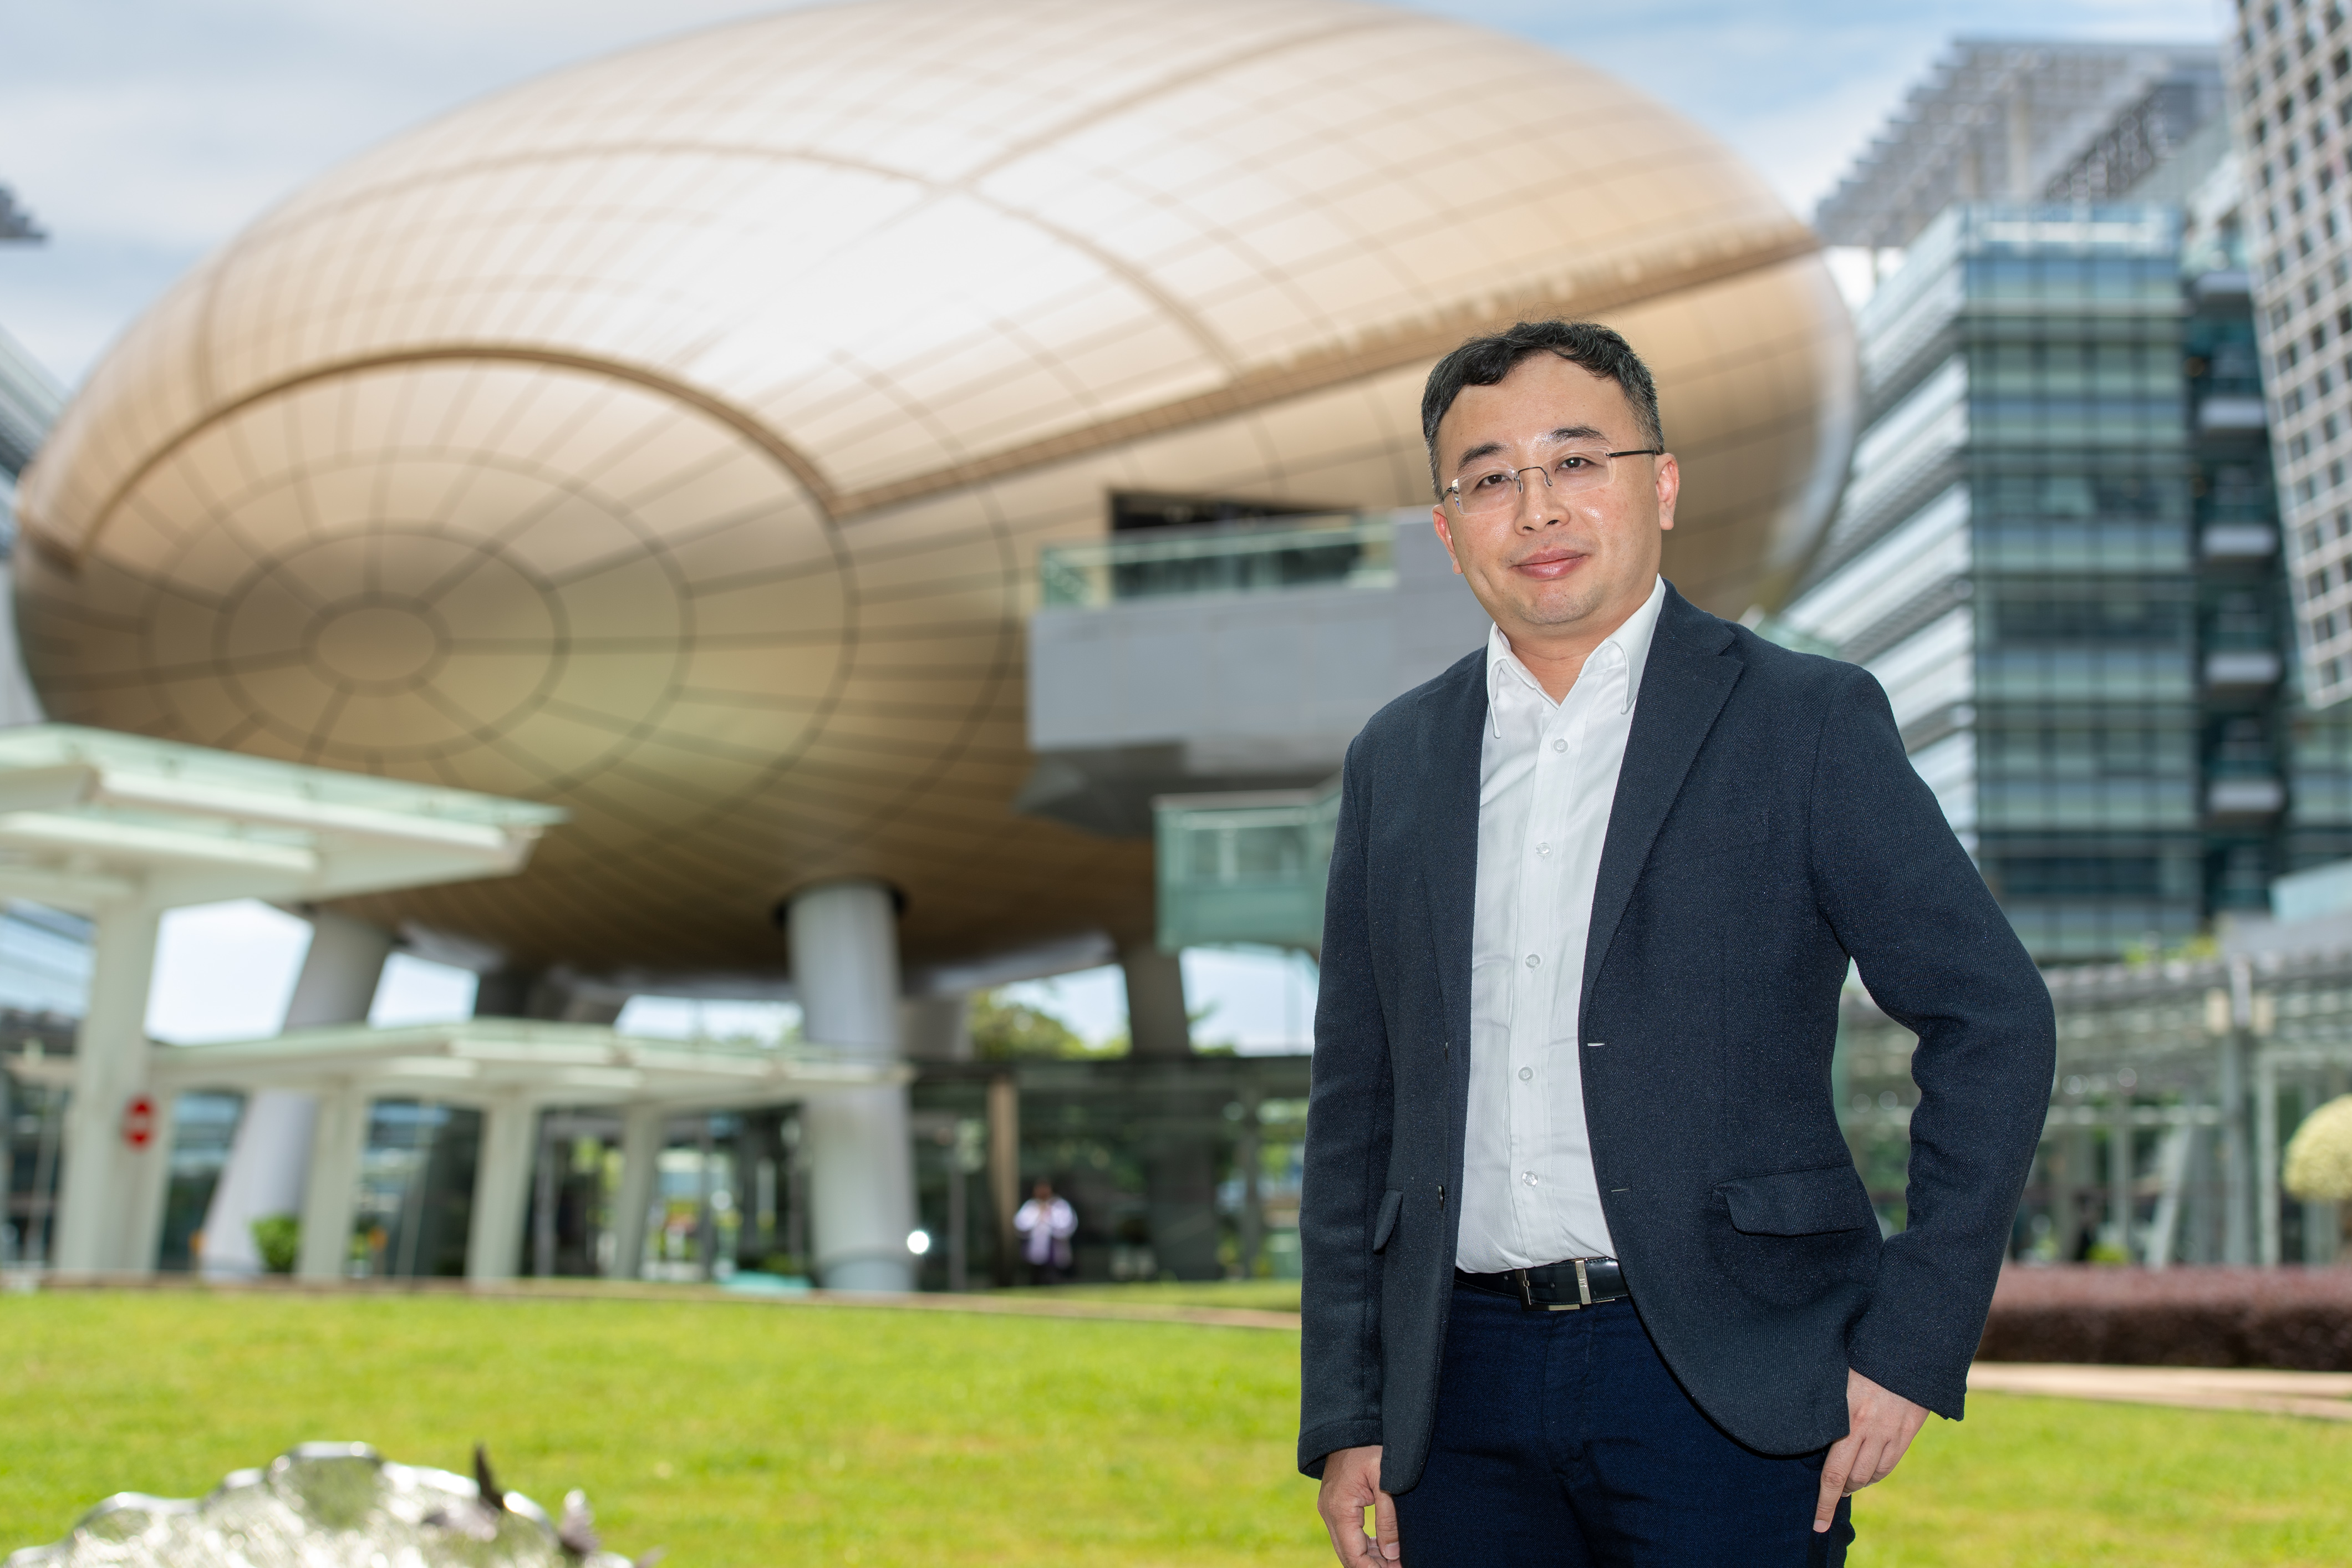 The “Bladder Cancer Photodynamic Therapeutic Agents with Off-On Magnetic Resonance Imaging Enhancement” project led by Professor Wong Ka-Leung was awarded a Gold Medal at the Geneva International Exhibition of Inventions.